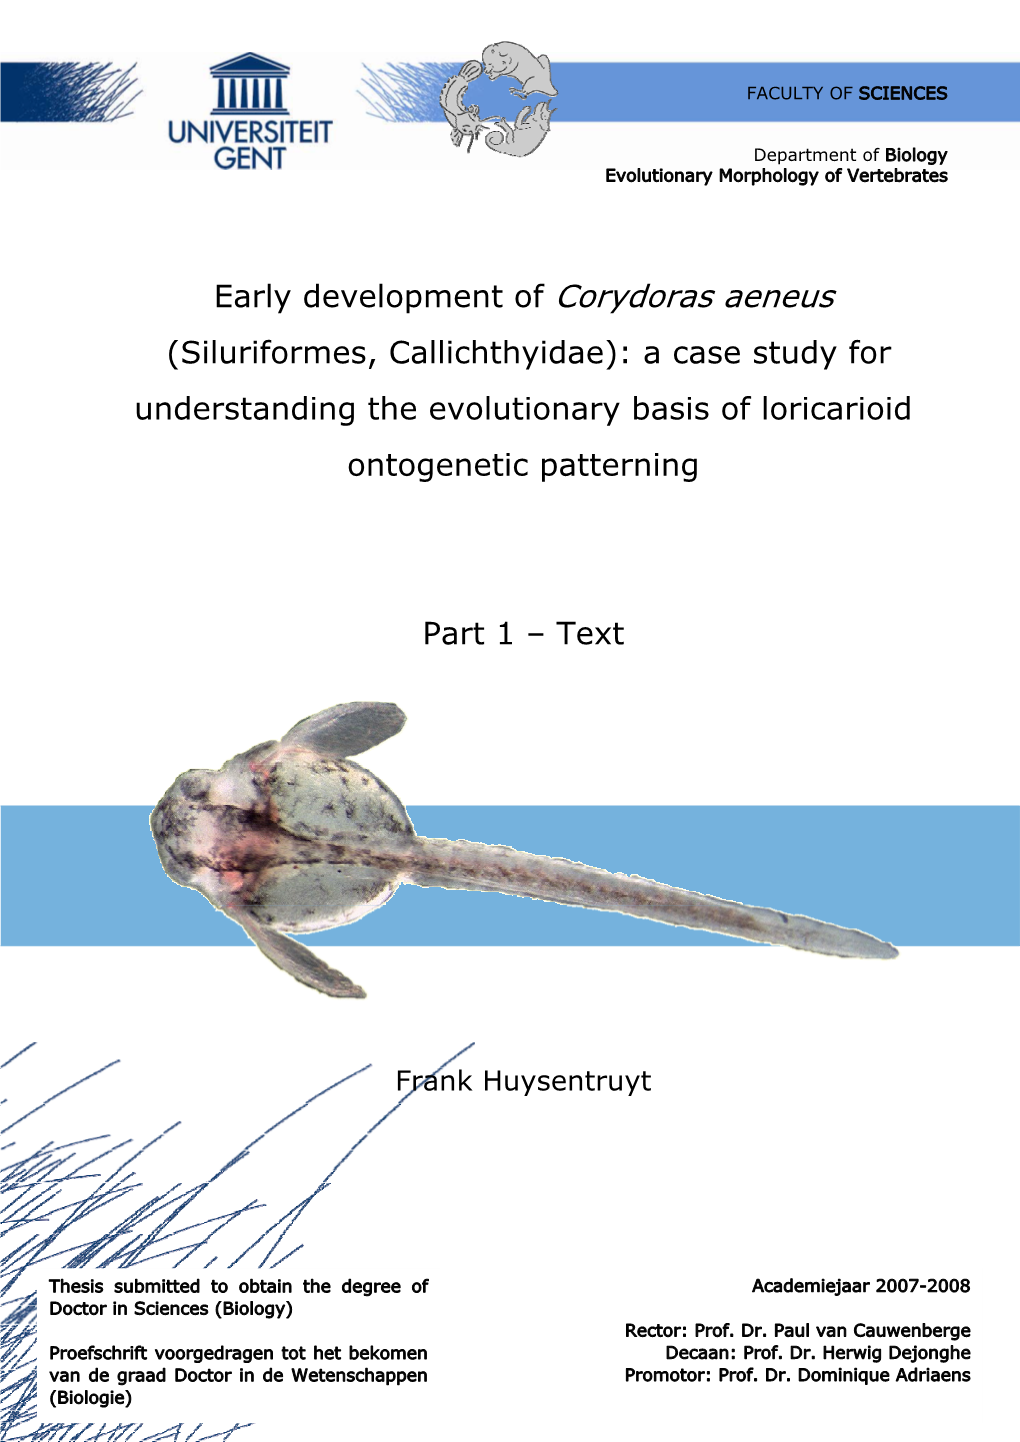 Early Development of Corydoras Aeneus (Siluriformes, Callichthyidae): a Case Study for Understanding the Evolutionary Basis of Loricarioid Ontogenetic Patterning